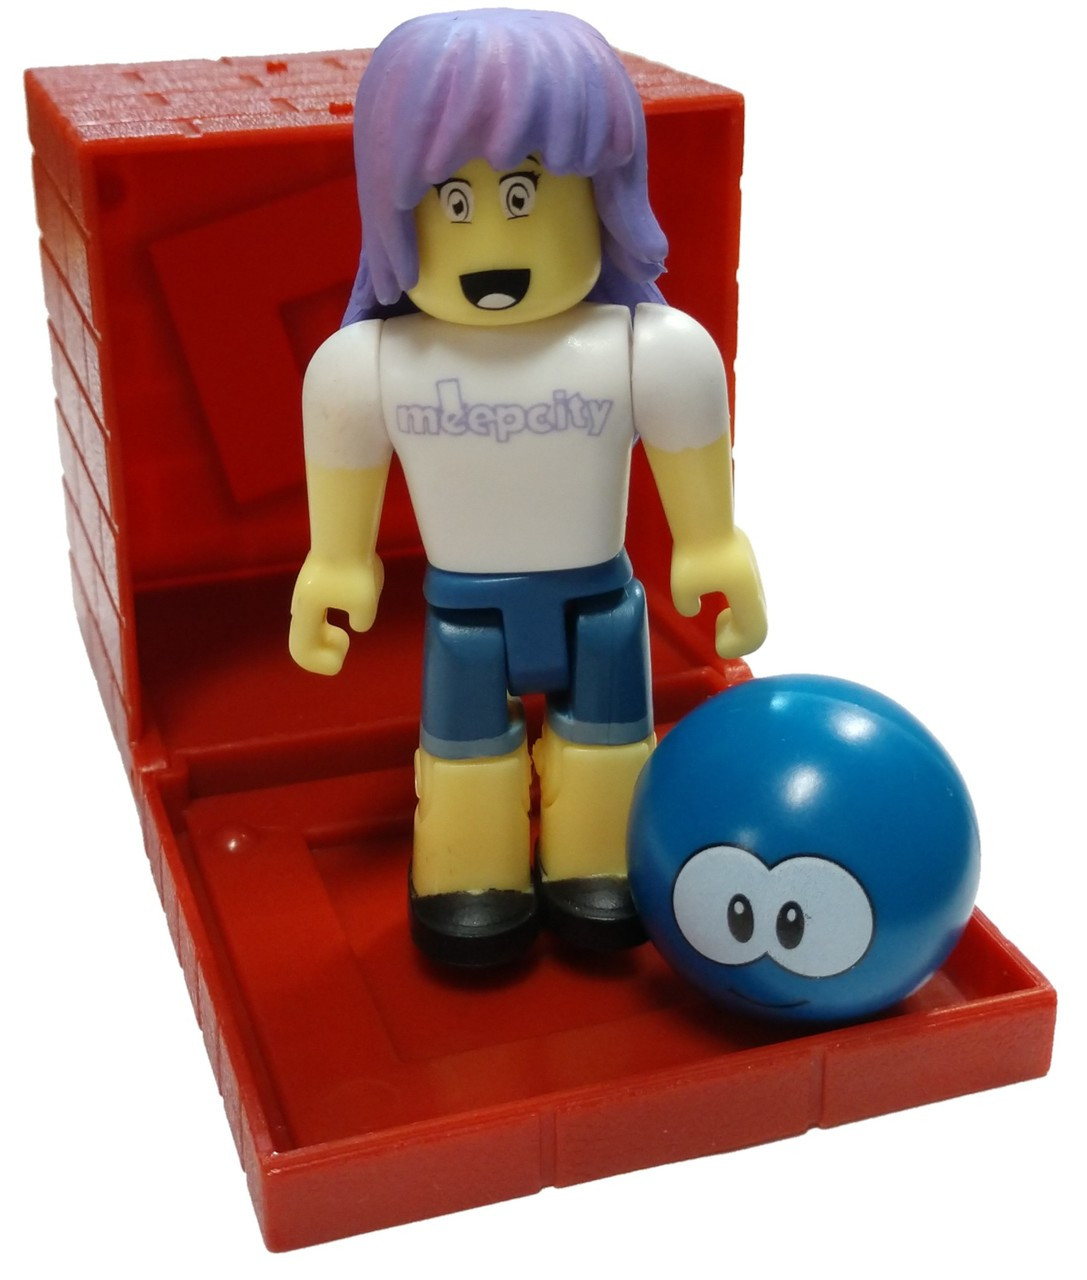 Roblox Red Series 4 Meepcity Pet Seller 3 Mini Figure With Red Cube And Online Code Loose Jazwares Toywiz - code on roblox assassin for dog